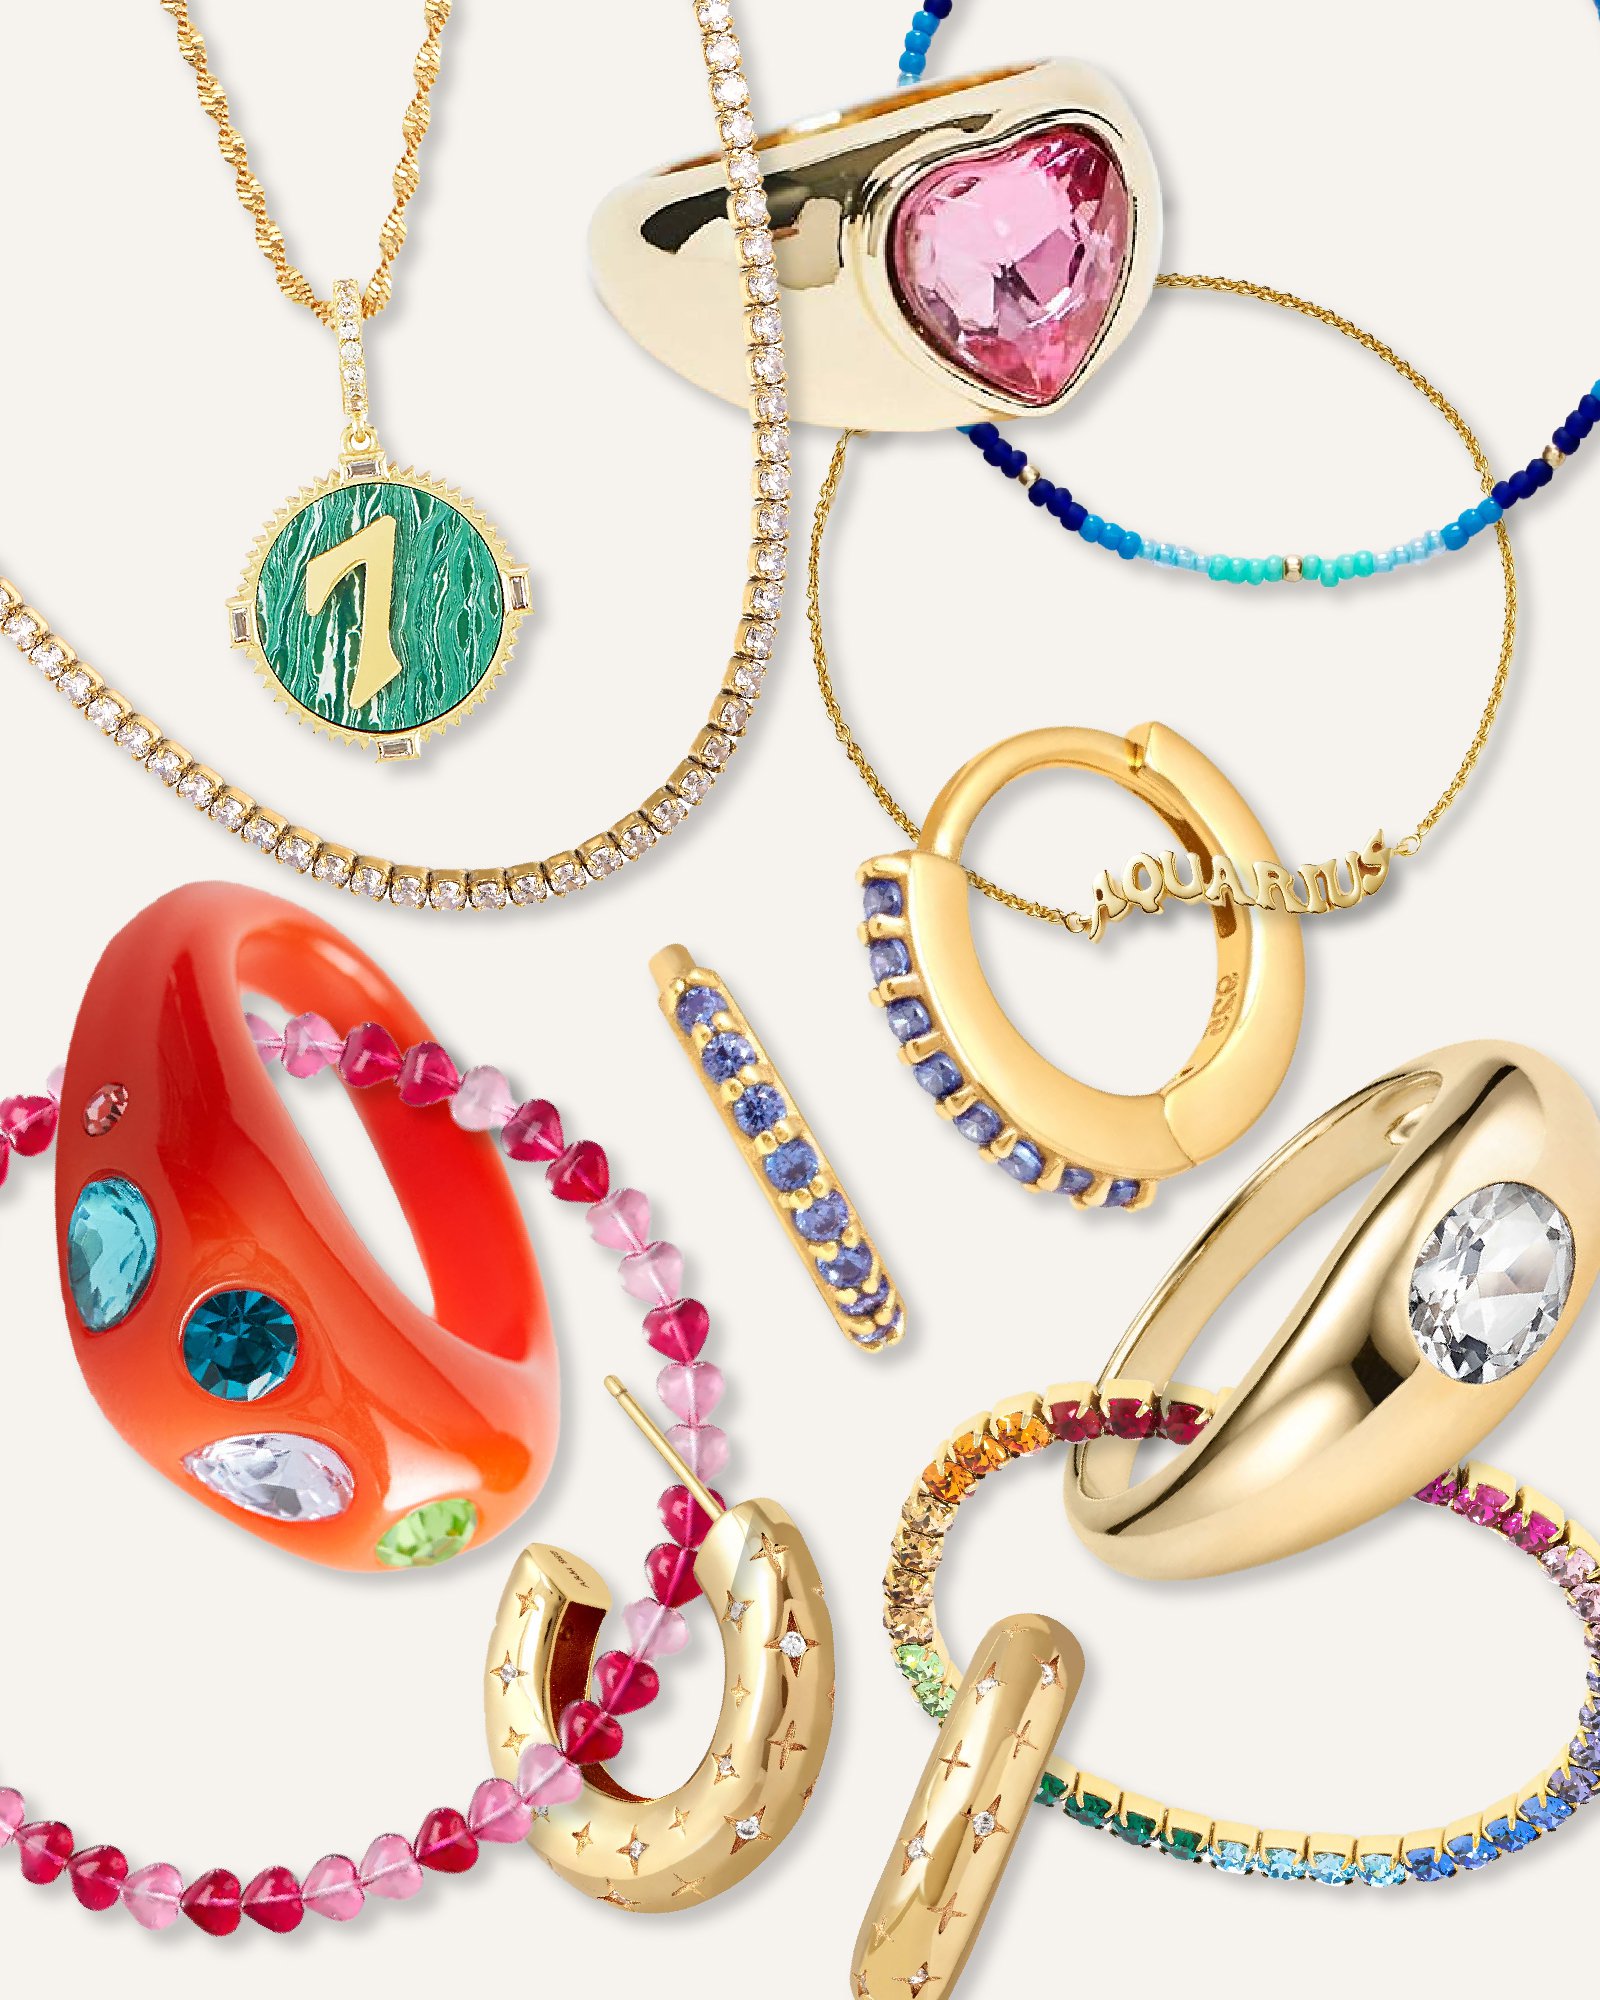 5 Must-Have Fashion Accessories for 2019 ⋆ Beverly Hills Magazine